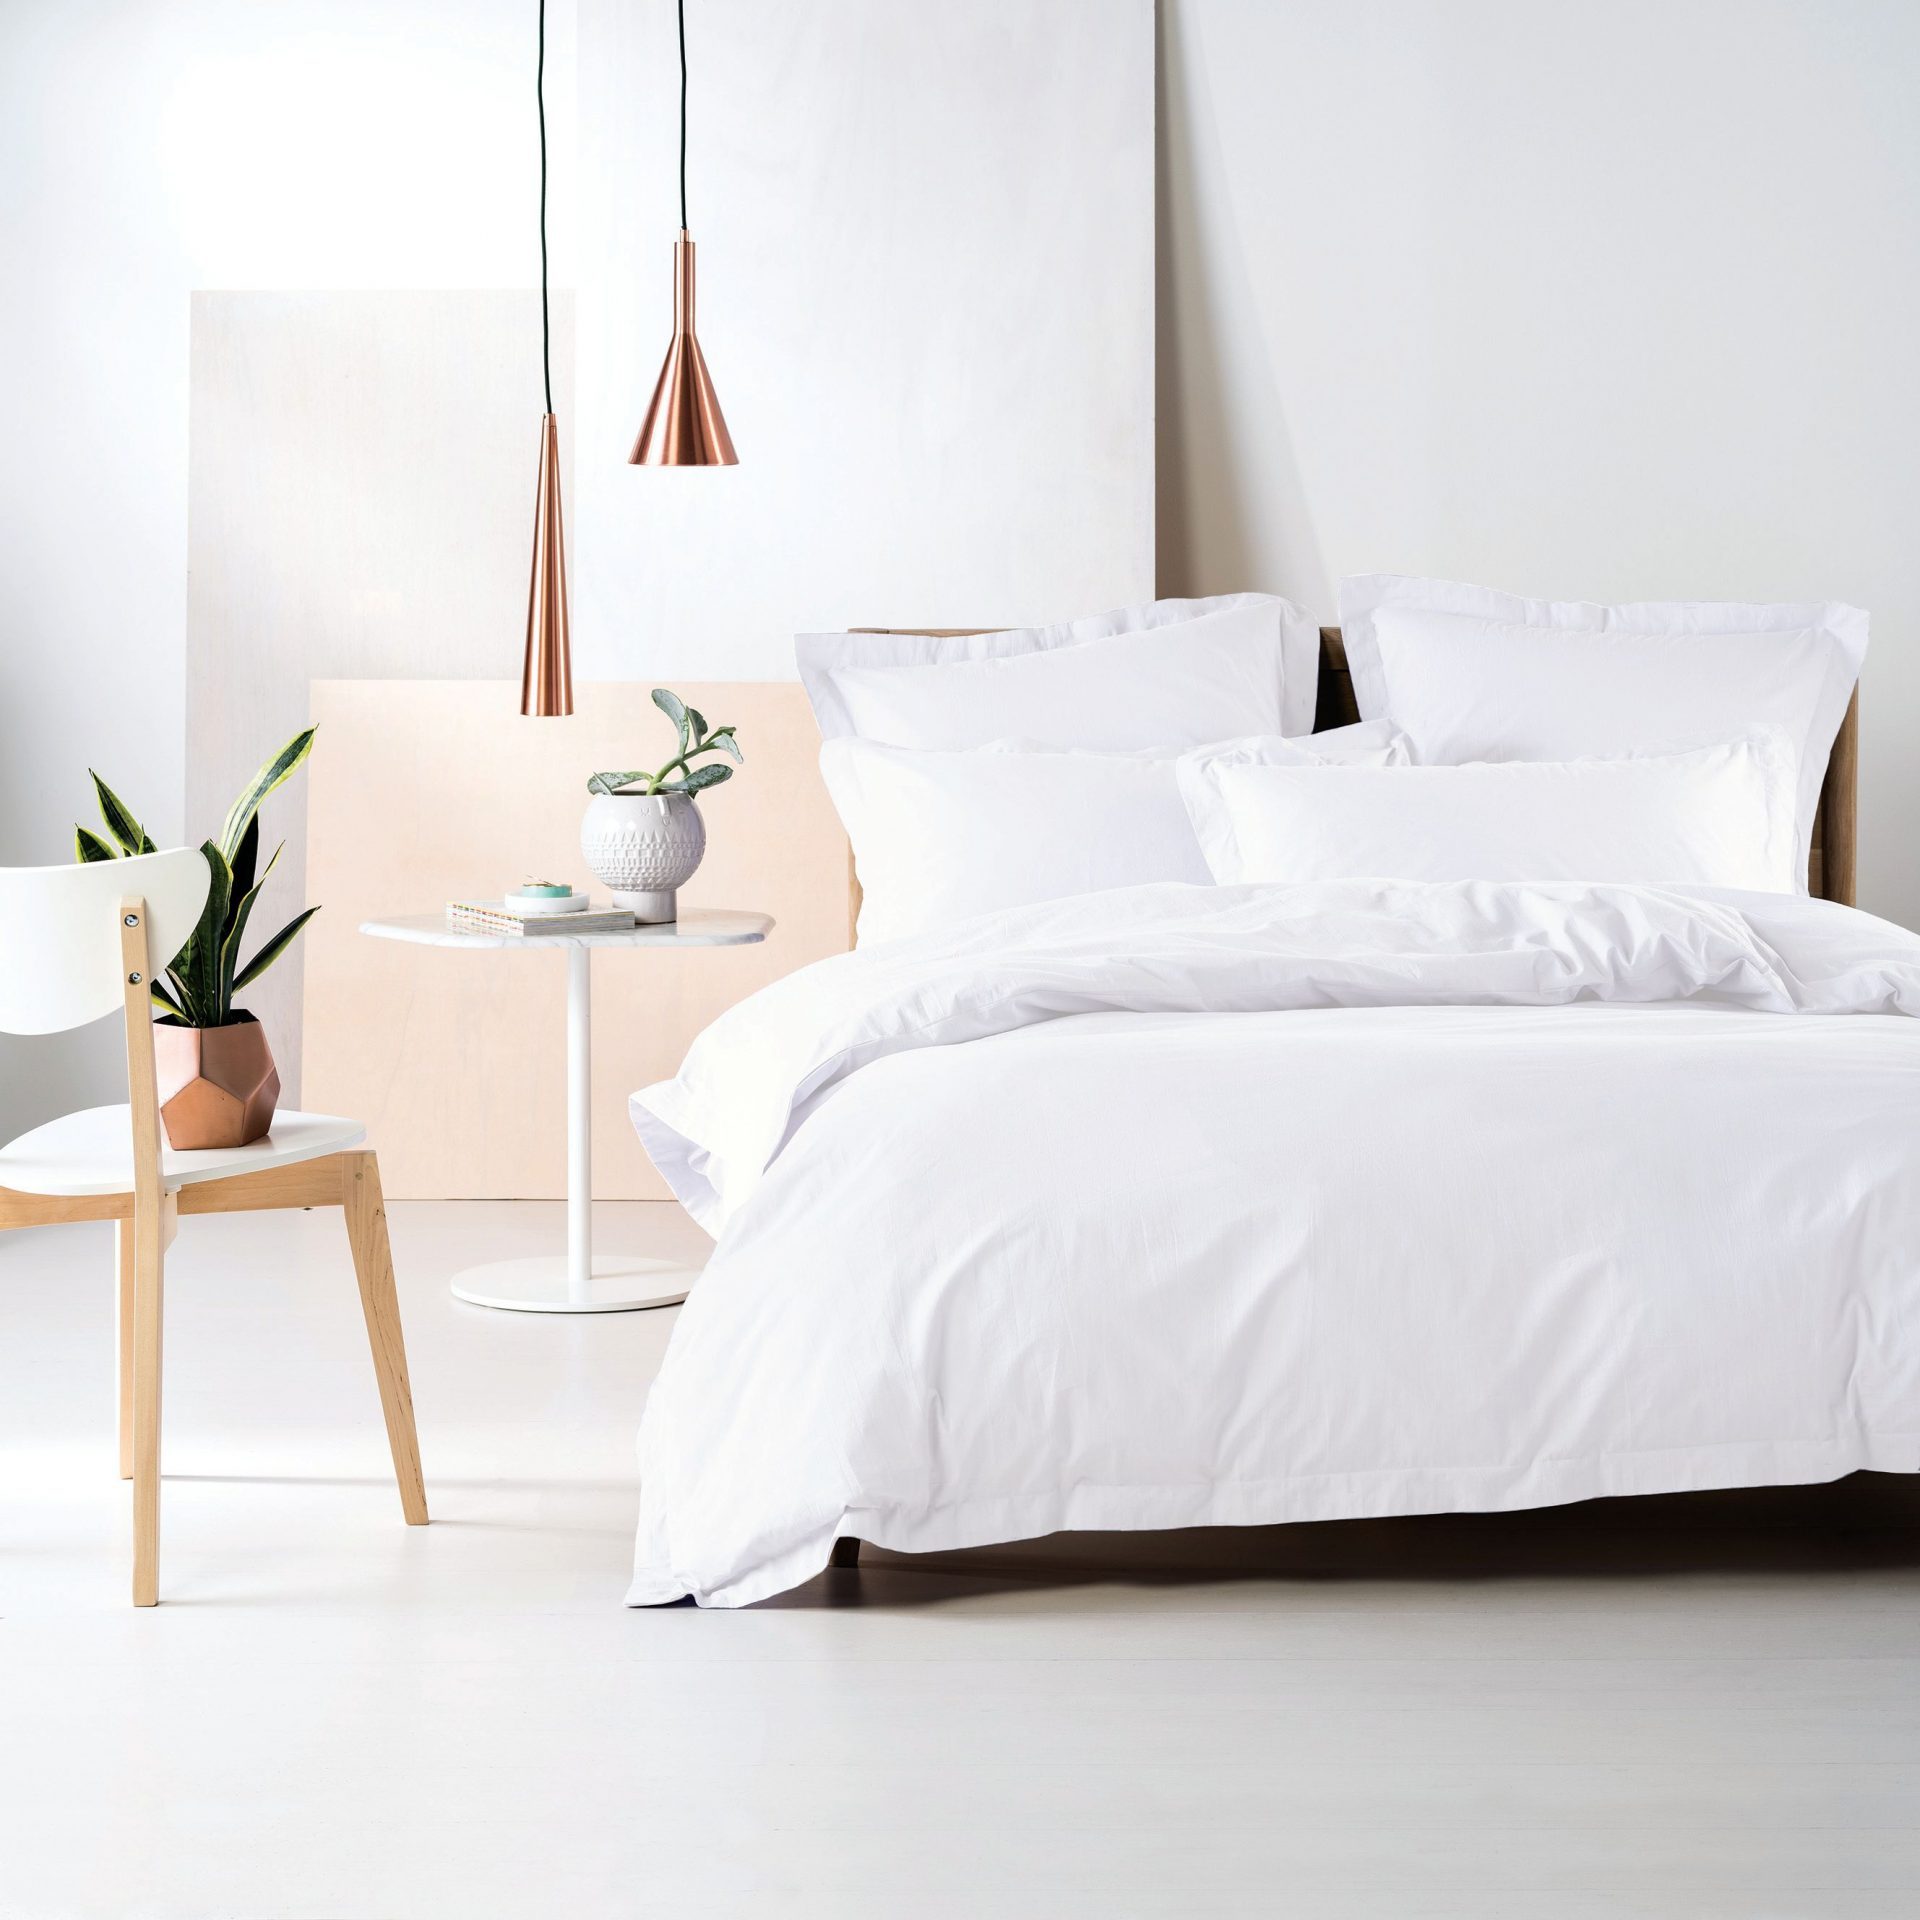 Cotton Percale Basics The Bedroom, Percale Duvet Cover